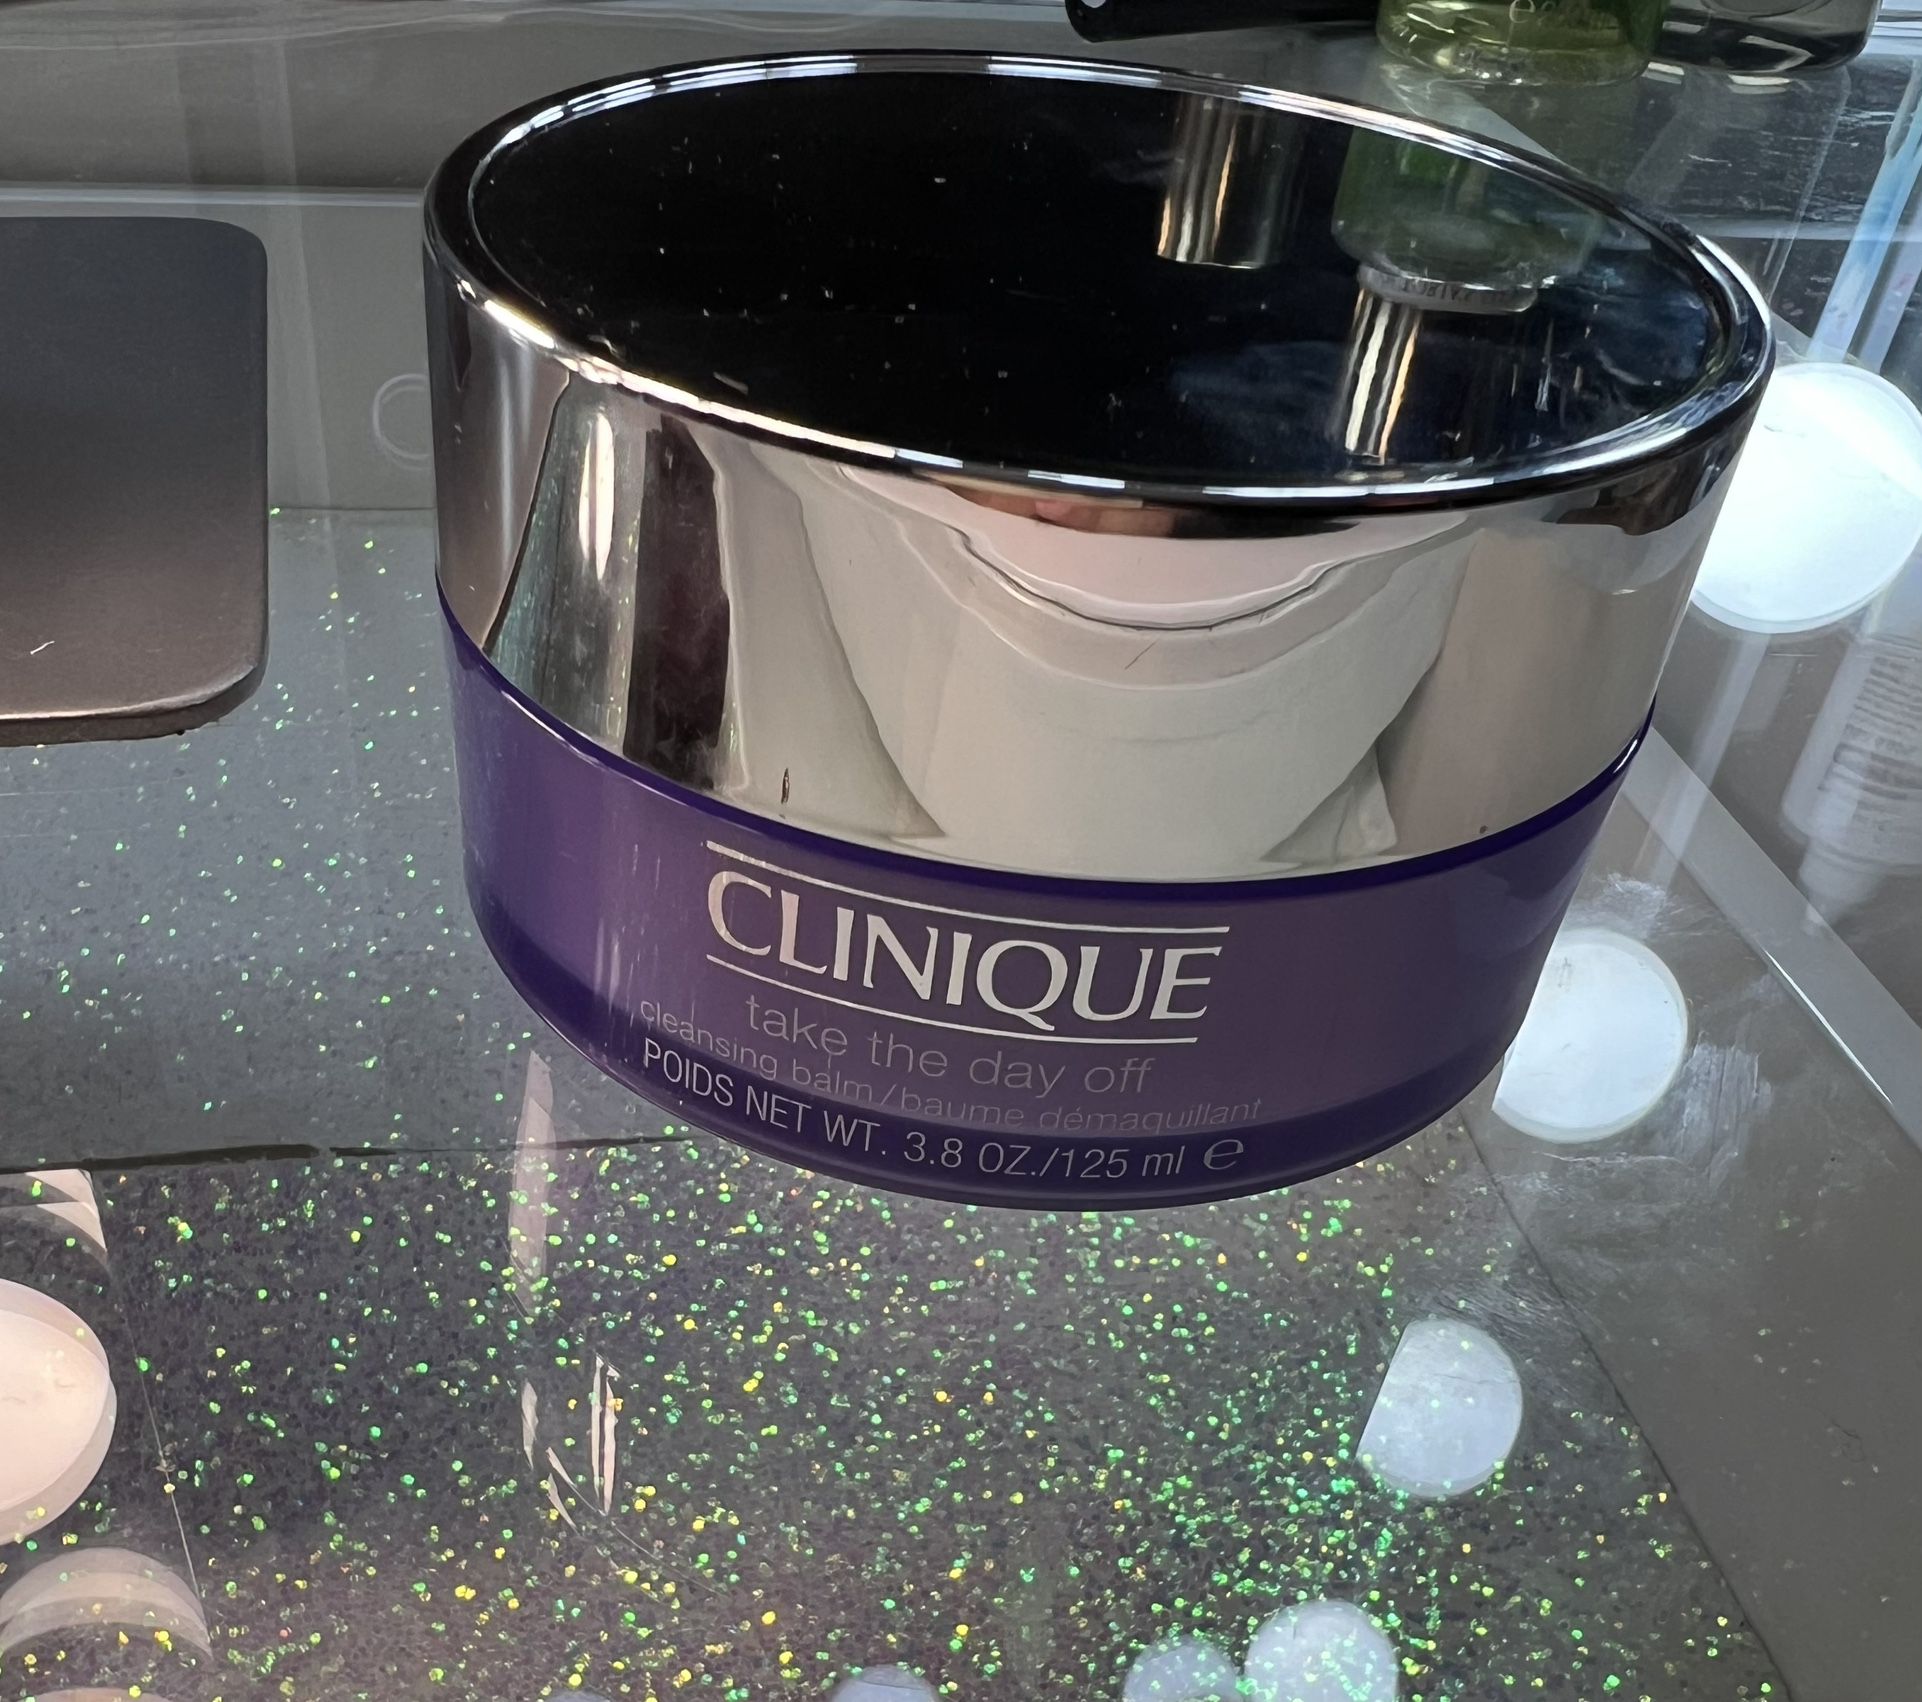 BRAND NEW CLINIQUE Take The Day Off Cleansing Balm POIDS Net Wt.  3.8 OZ./125 ml Retail $41